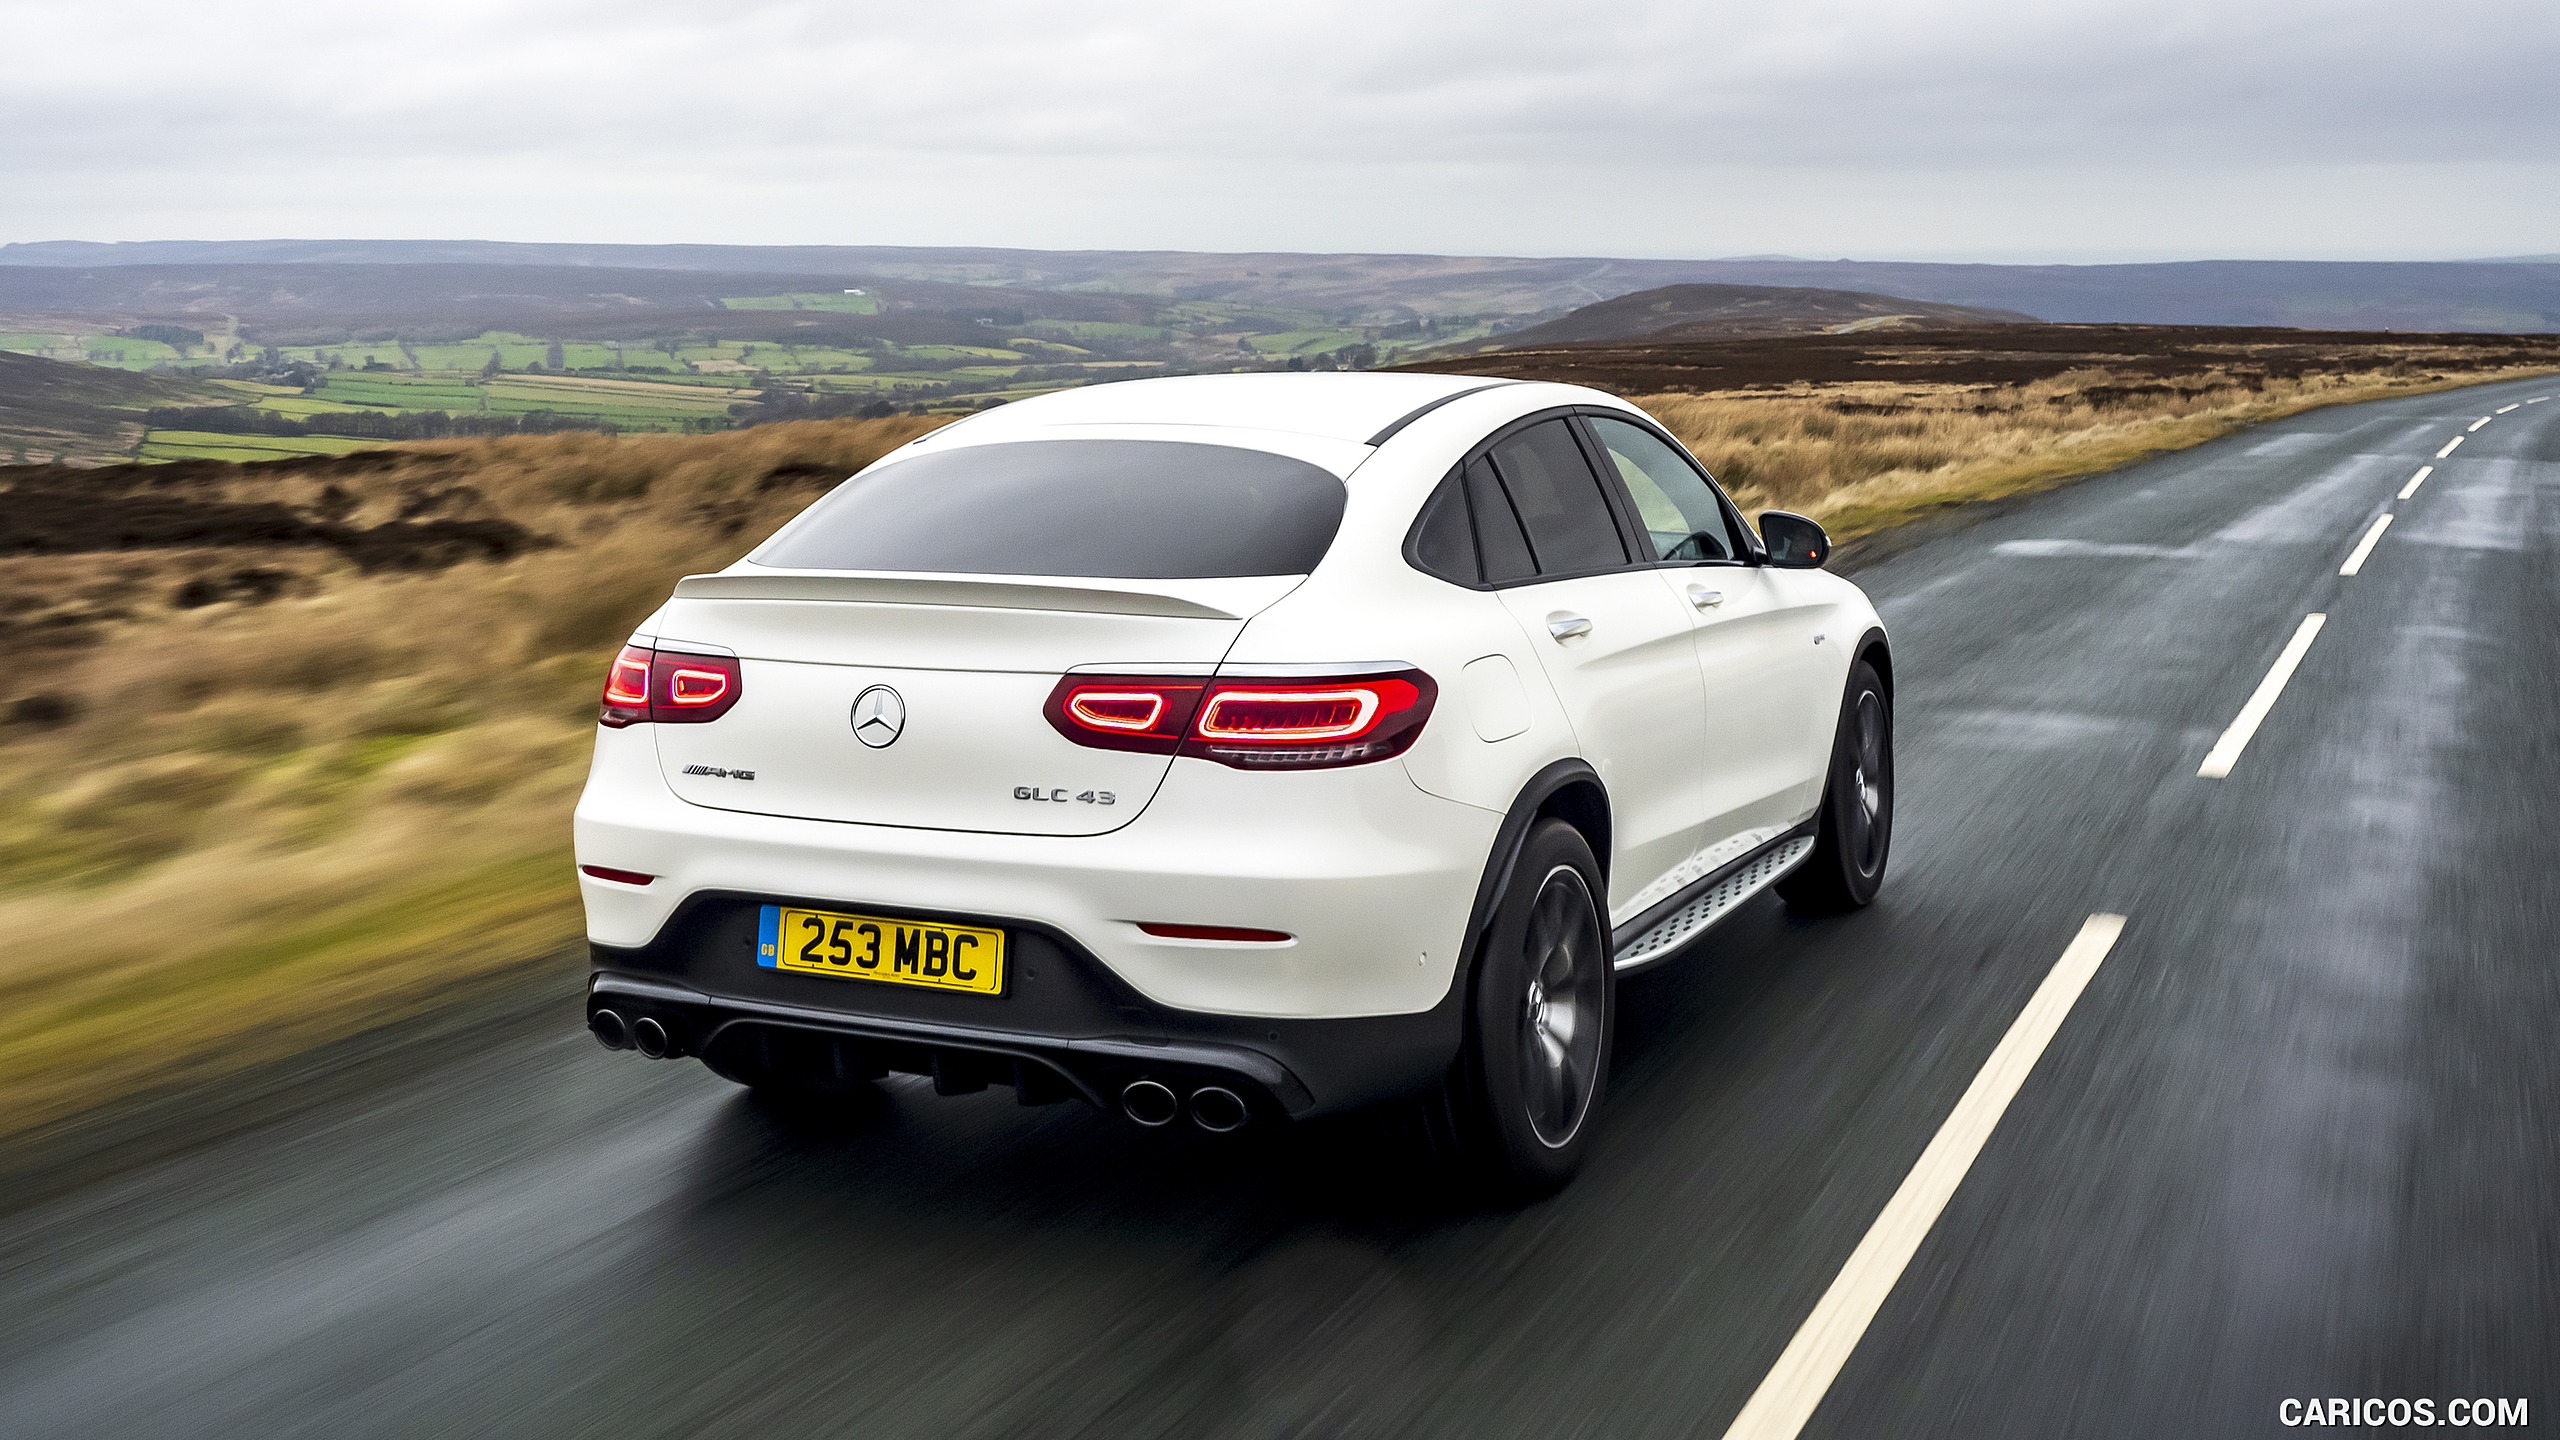 2020 Mercedes-AMG GLC 43 Coupe (UK-Spec) - Rear, #43 of 173